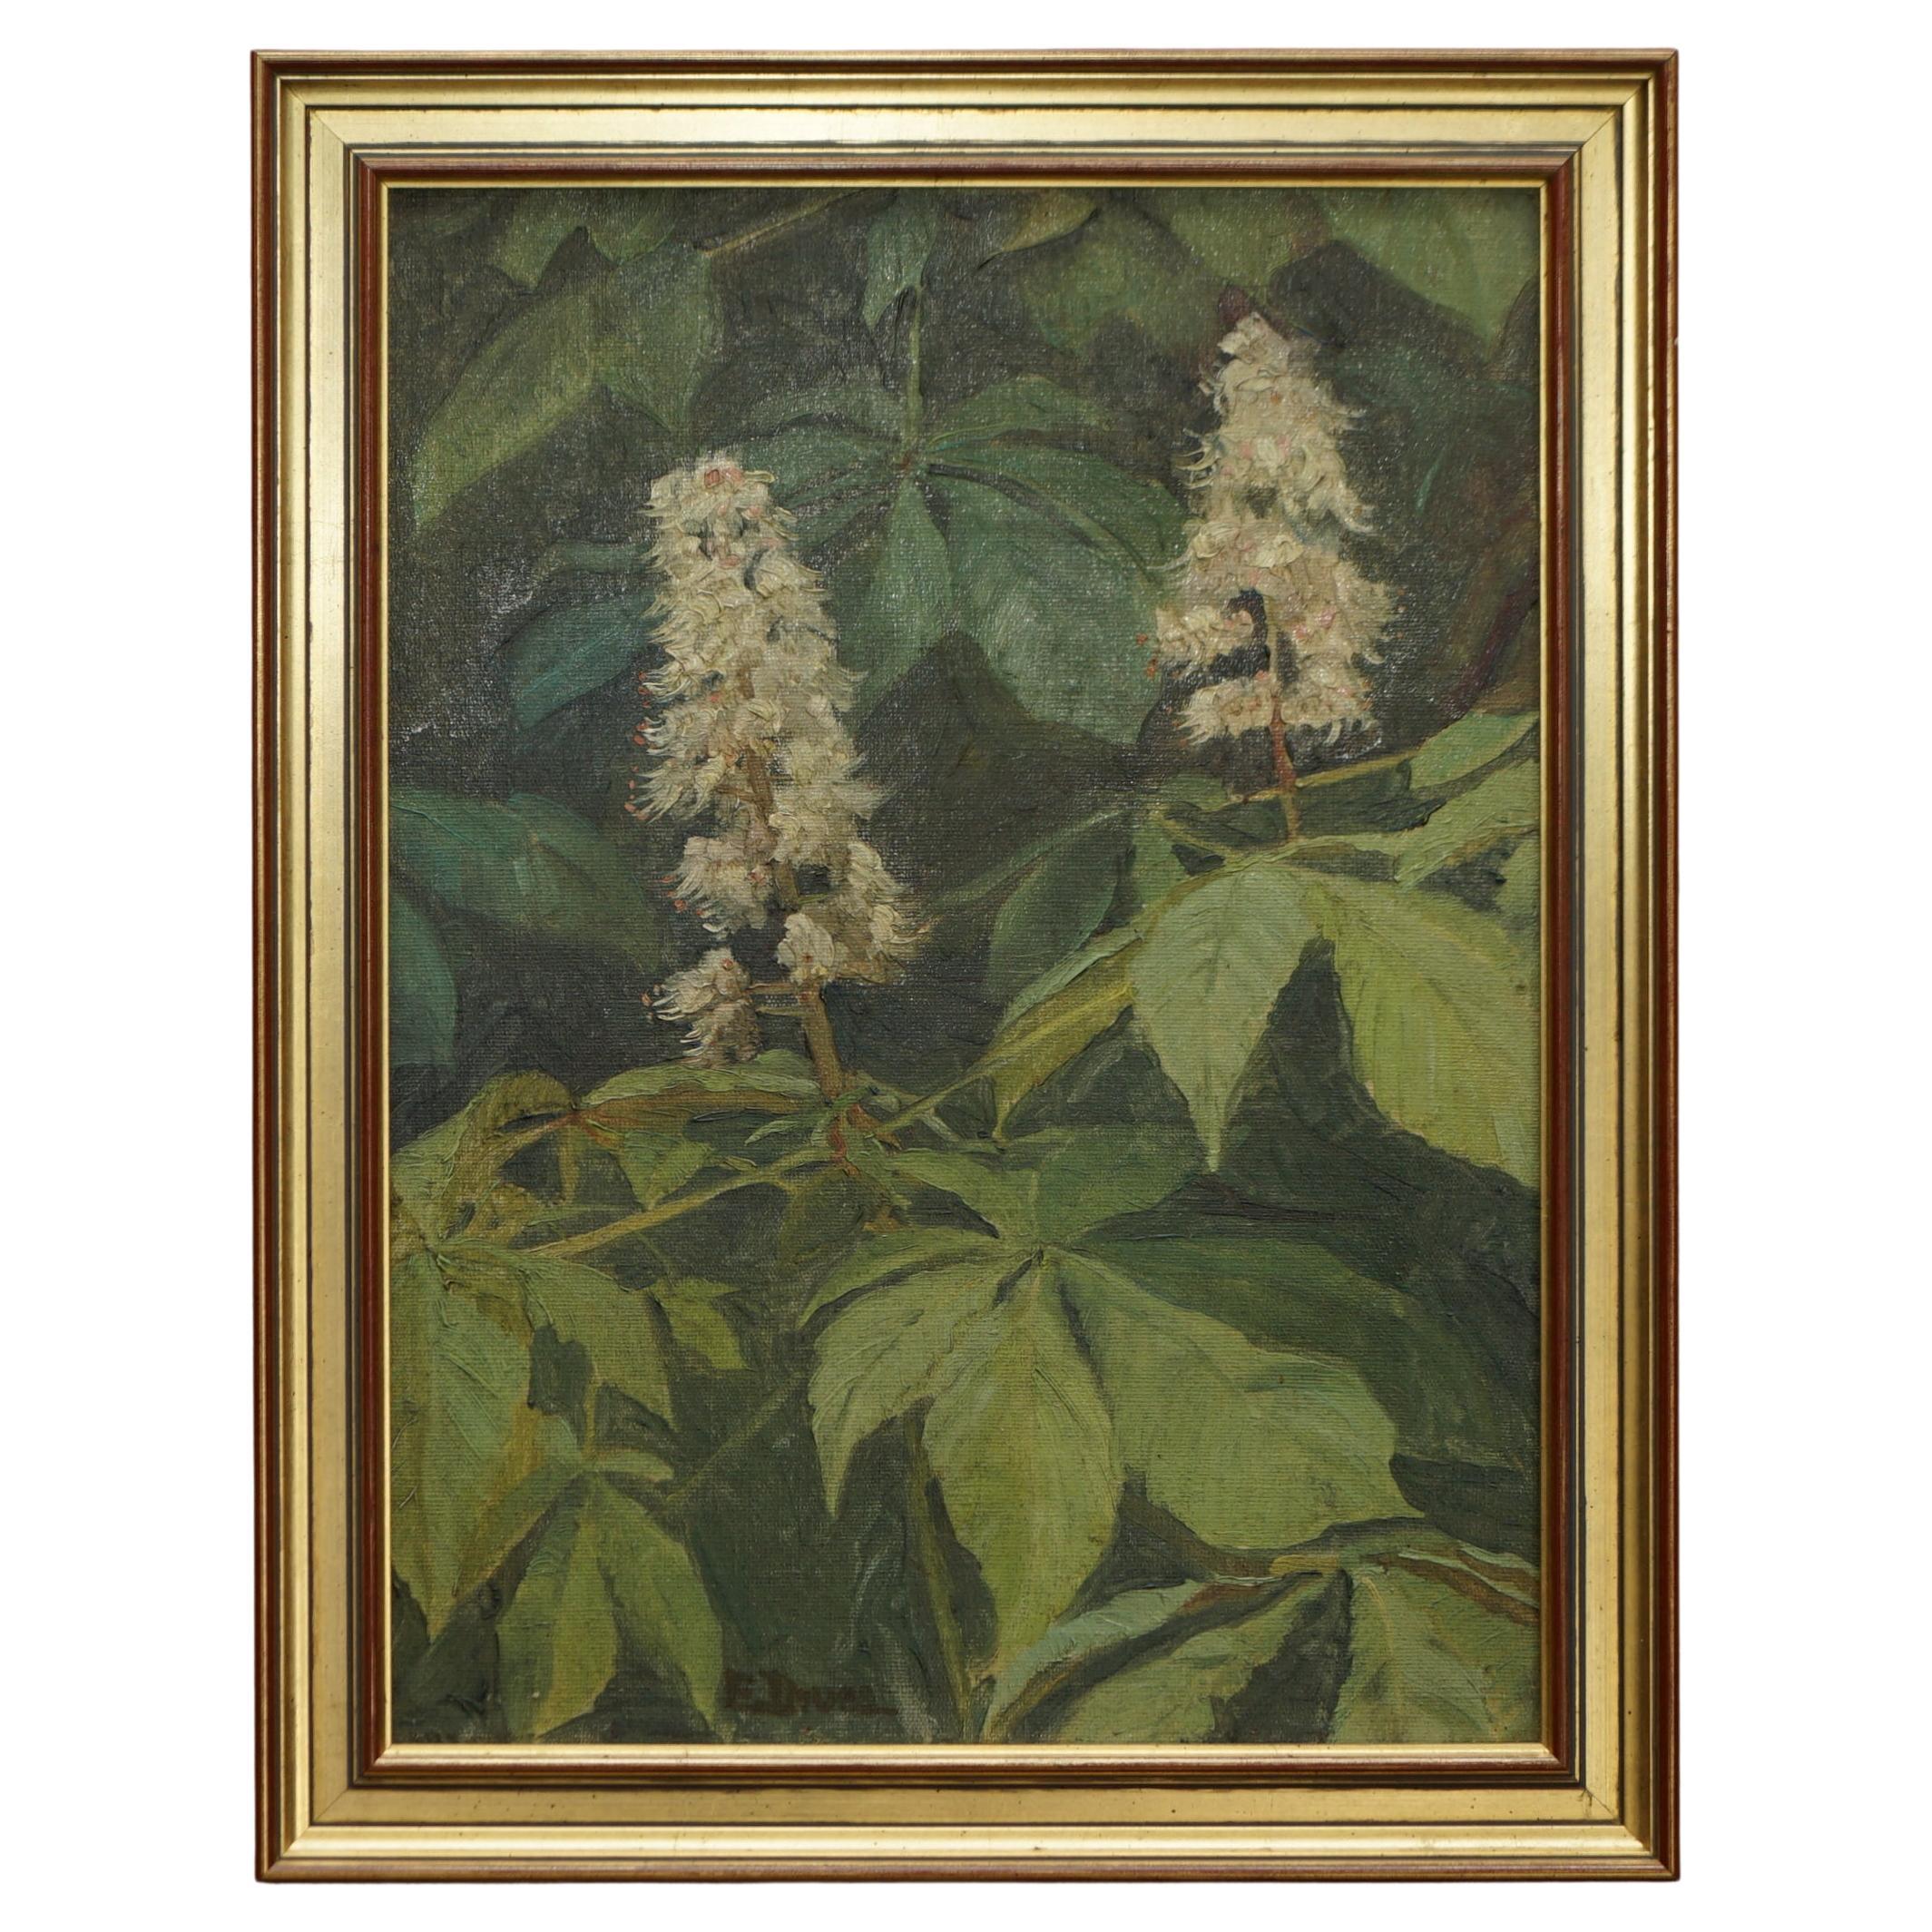 Lovely Victorian Oil on Canvus Painting by E.Drvee circa 1880-1900 of Flowers